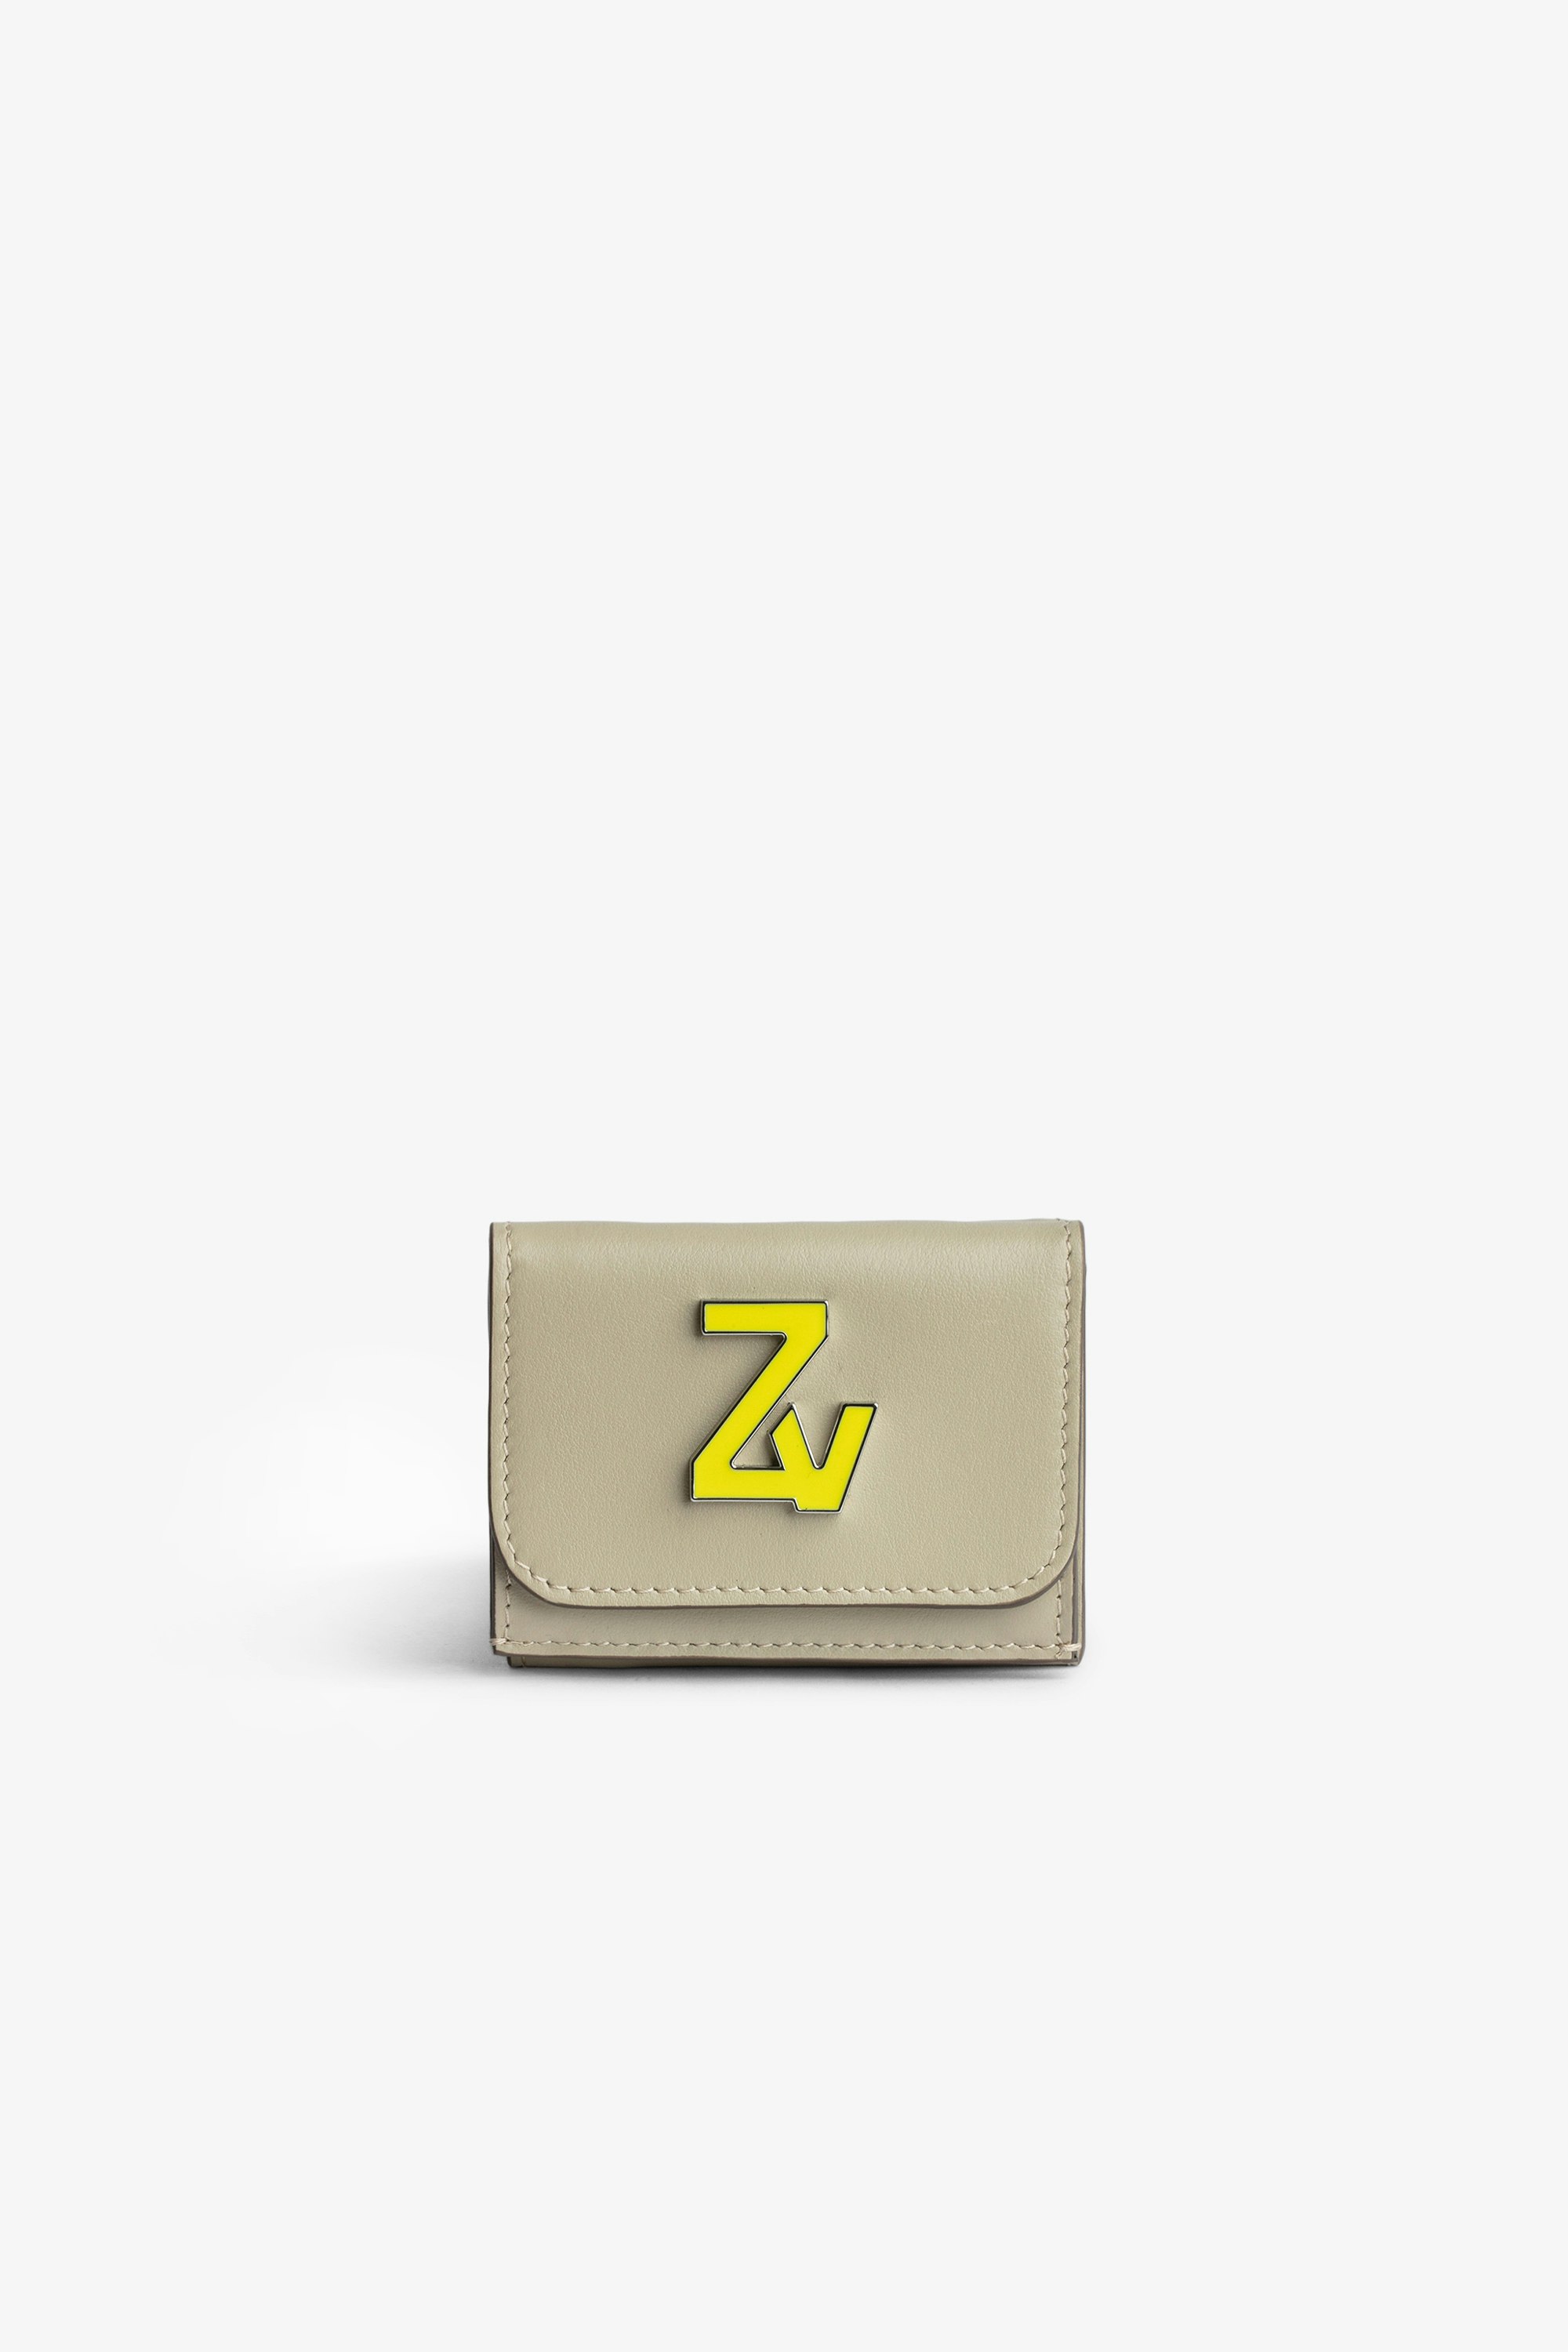 ZV Initiale Le Trifold Wallet Women’s small wallet in beige smooth leather with yellow ZV